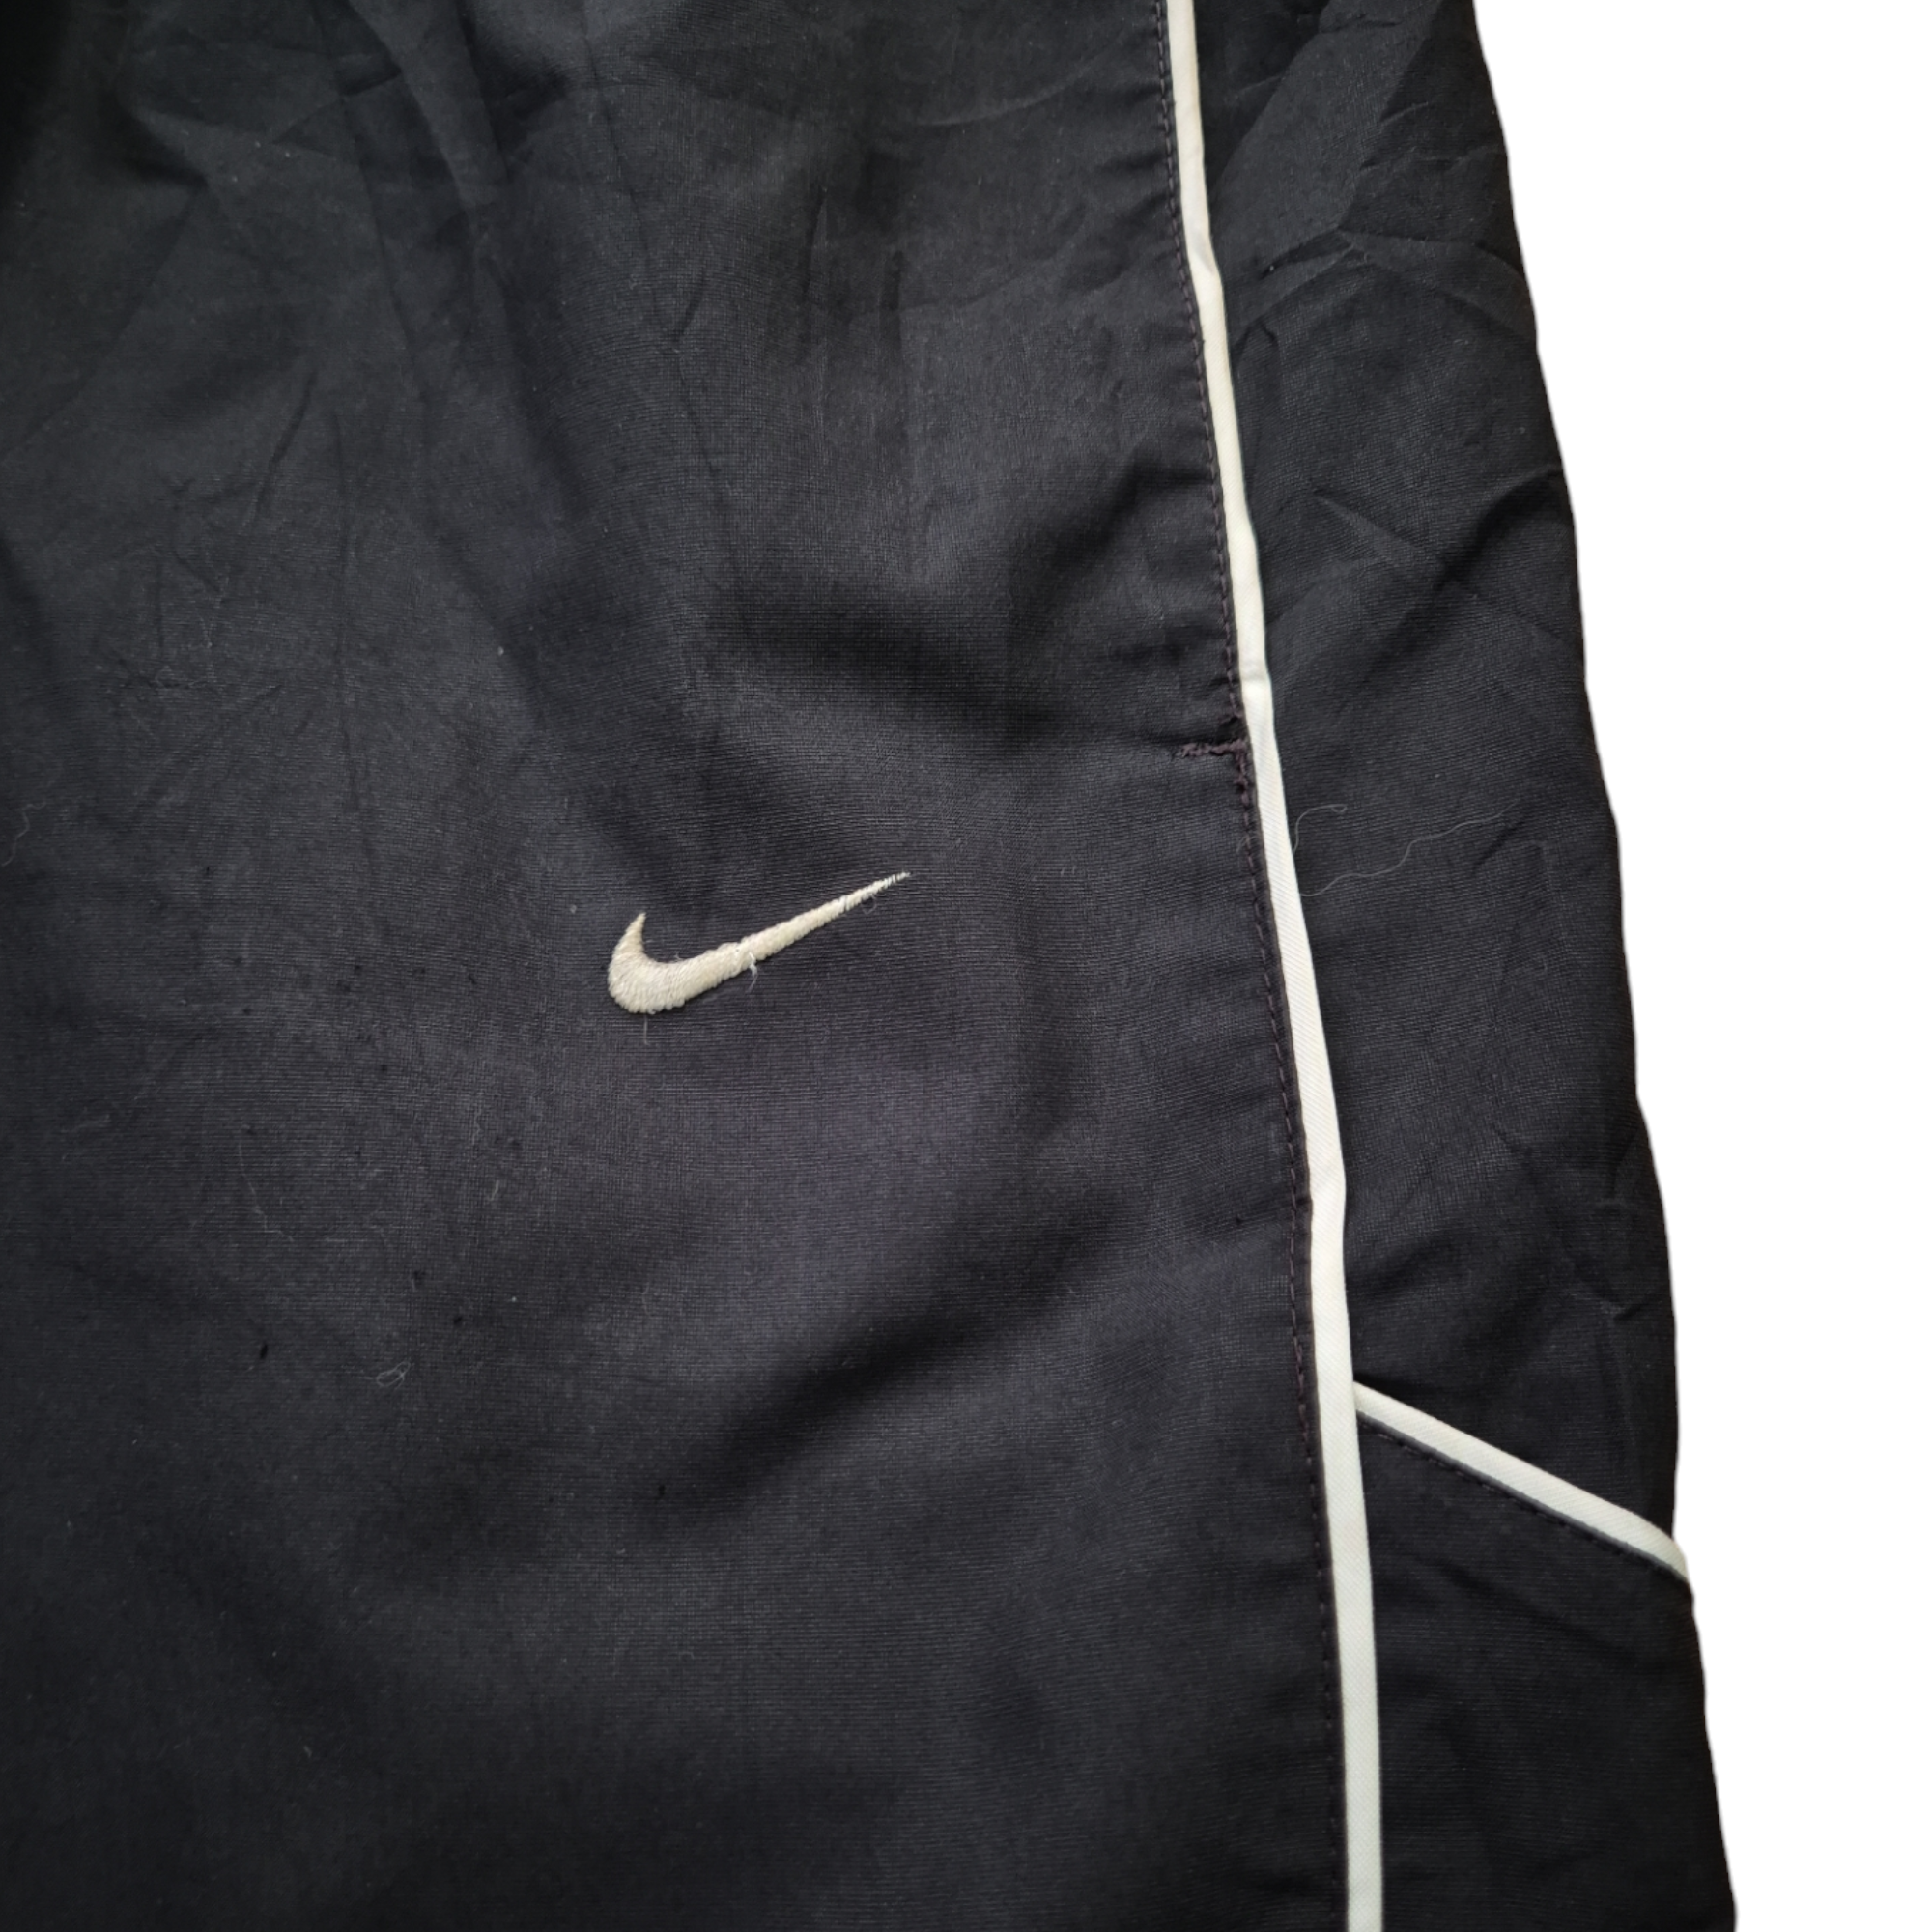 [L] Nike the athletic dept Trackpants